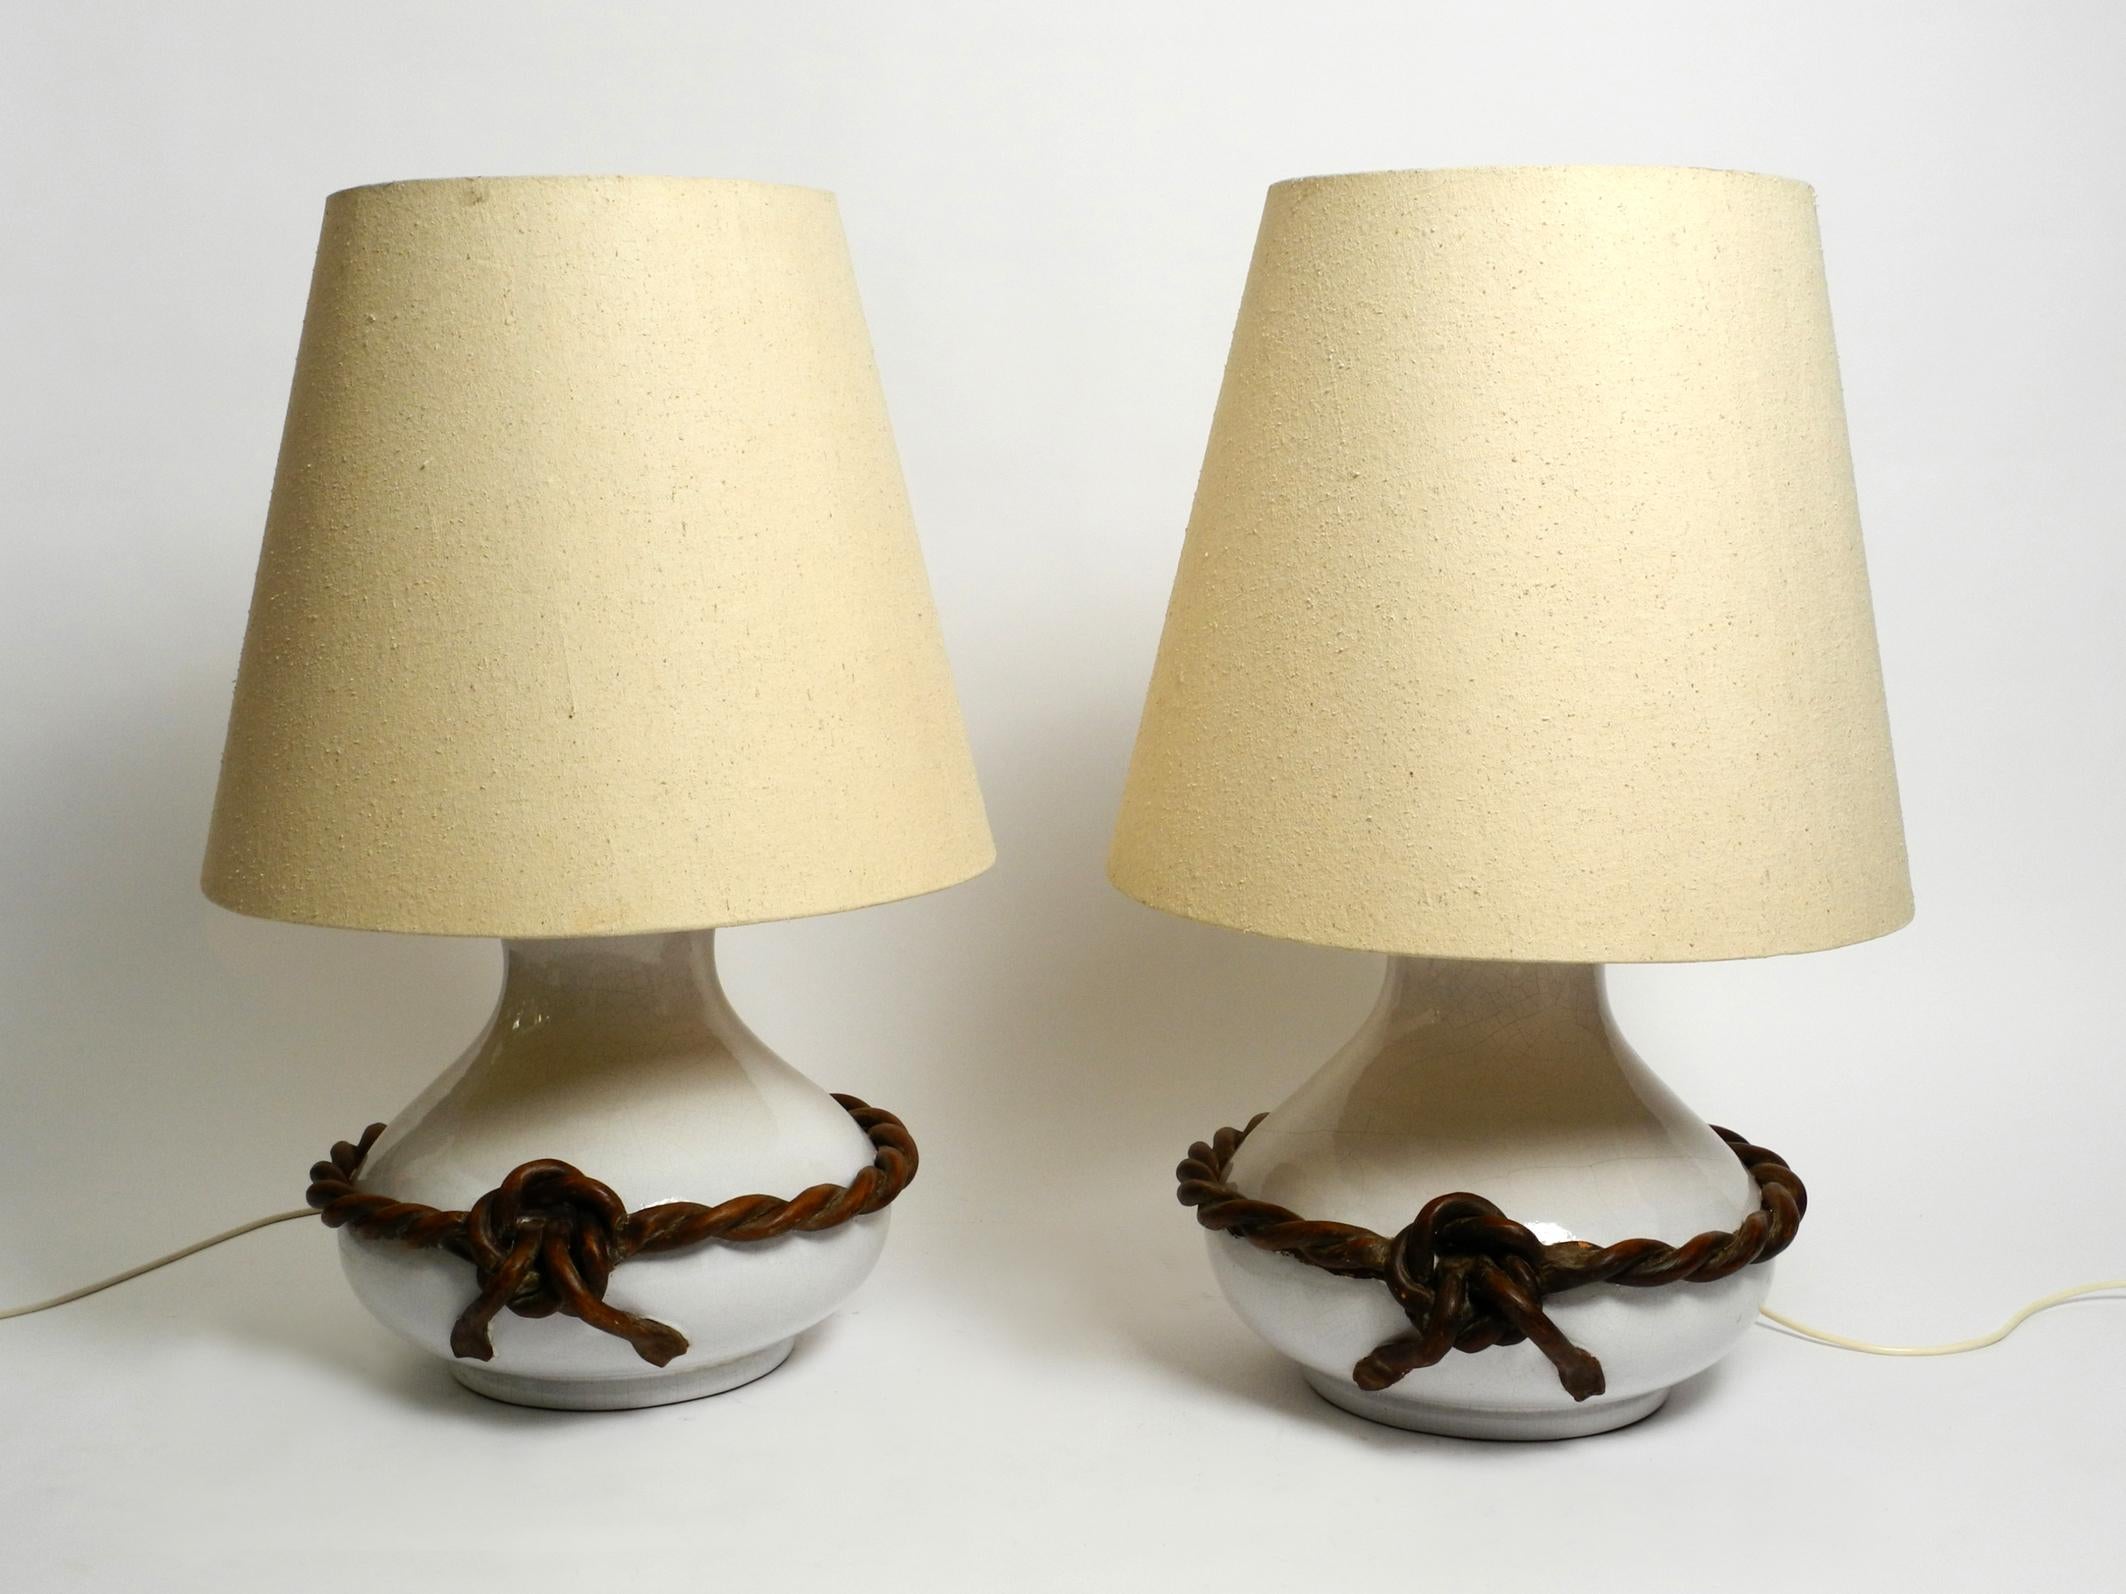 Two beautiful giant Italian midcentury white ceramic table lamps with original shades.
Great classic Italian design.
White glazed ceramic with a brown cord on the outside, also made of ceramic.
High-quality handcrafted. Wiring has been replaced